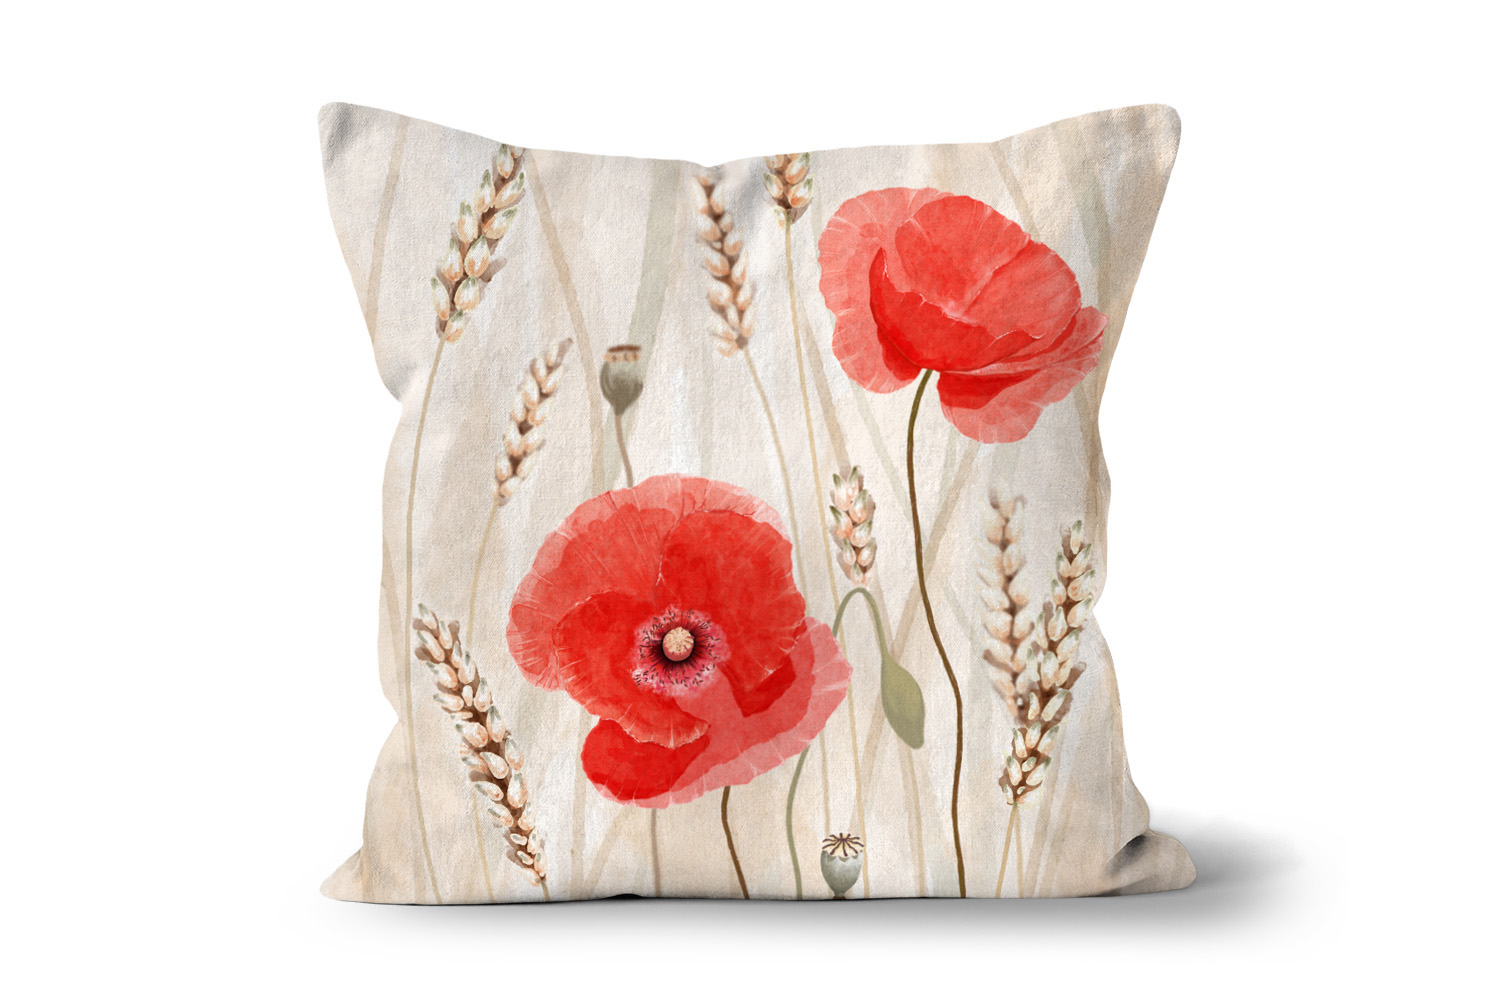 Poppies and Corn 24in x 24in Throw Cushion